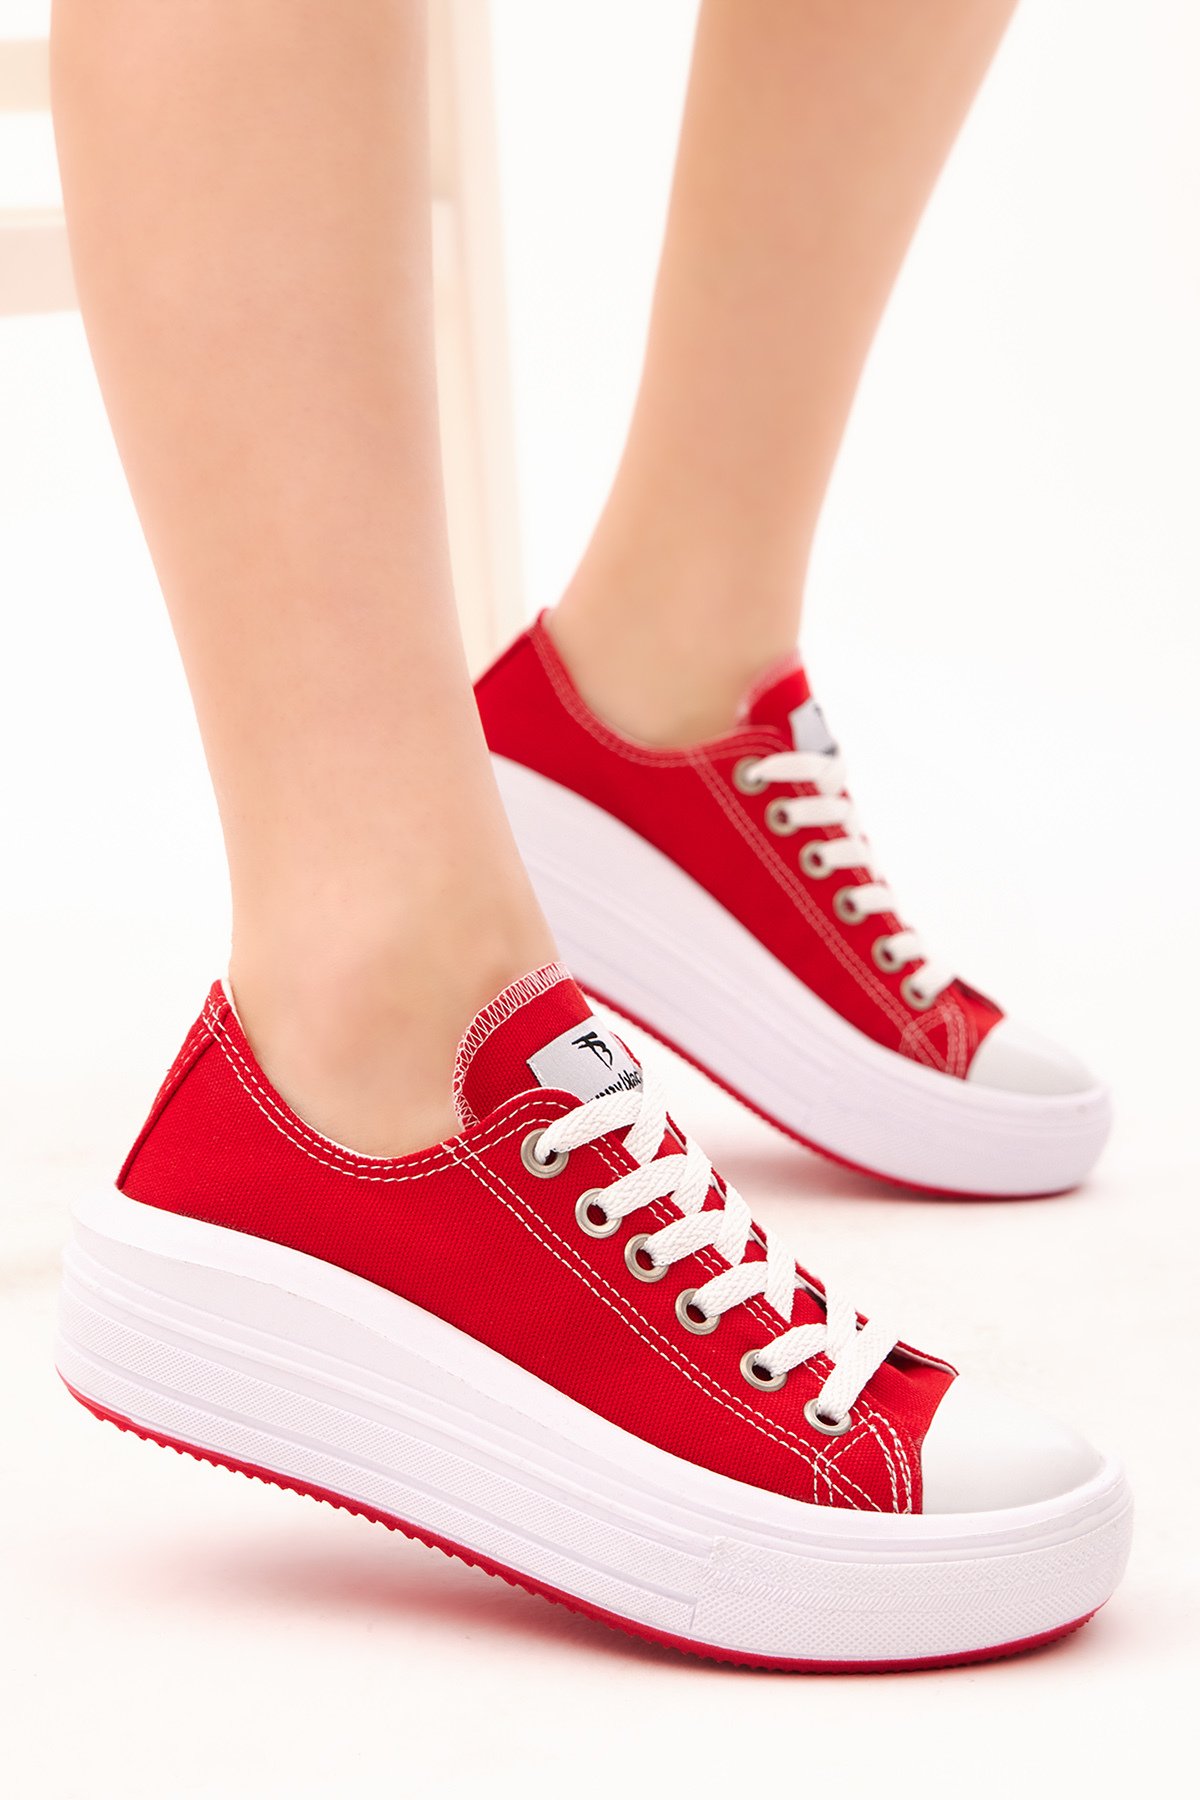 Tonny Black Women's Red Comfortable Fit Thick Soled Sneakers.